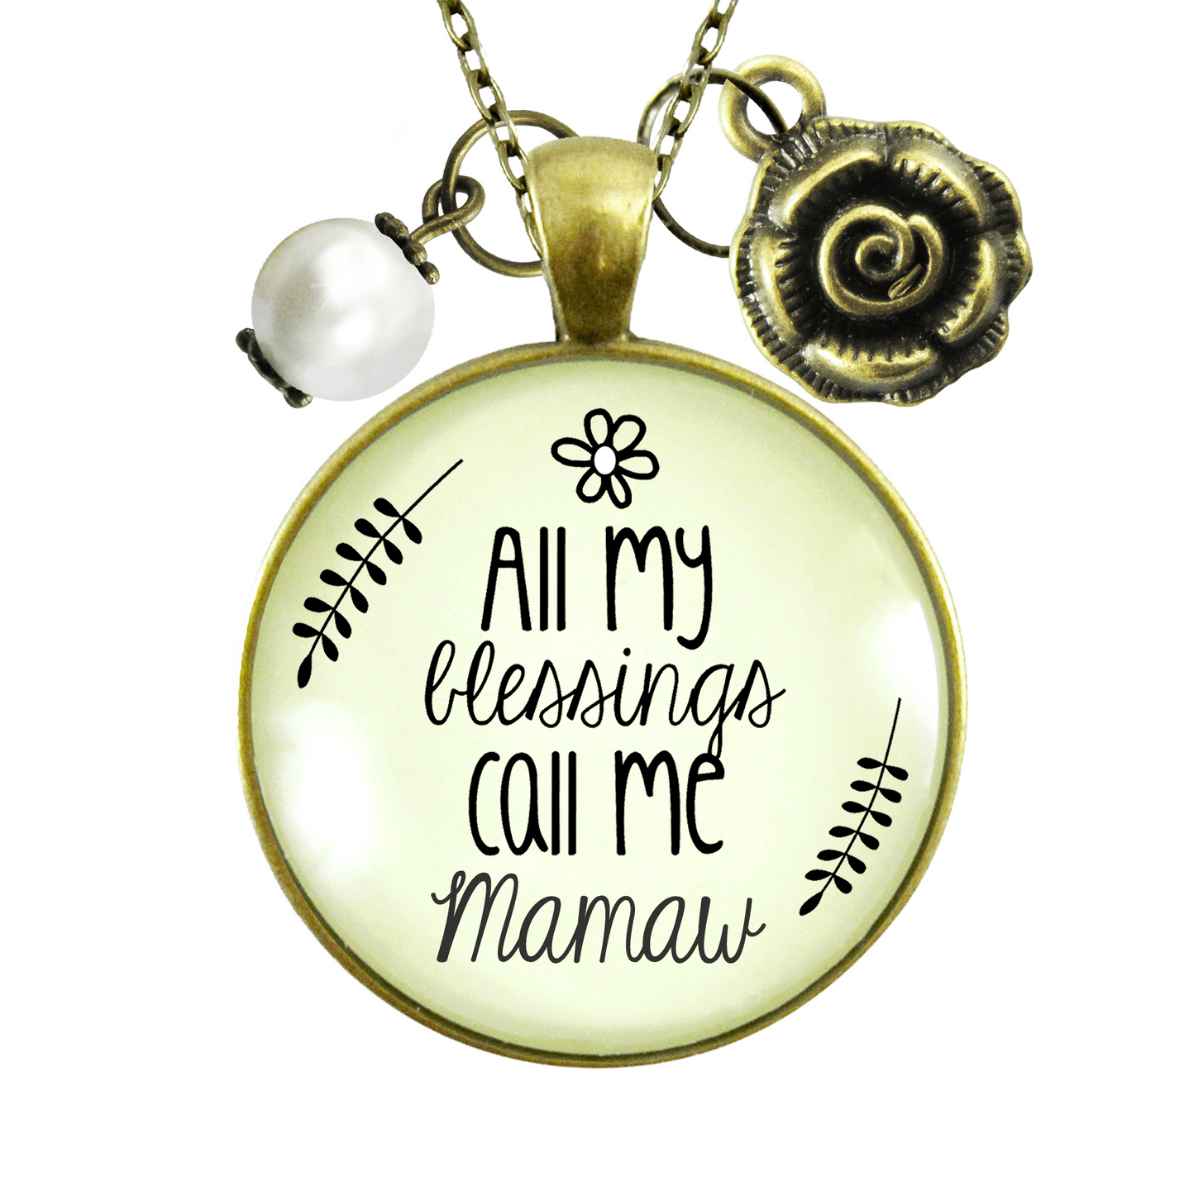 Gutsy Goodness Mamaw Necklace All My Blessings Southern Grandma Gift - Gutsy Goodness Handmade Jewelry;Mamaw Necklace All My Blessings Southern Grandma Gift - Gutsy Goodness Handmade Jewelry Gifts